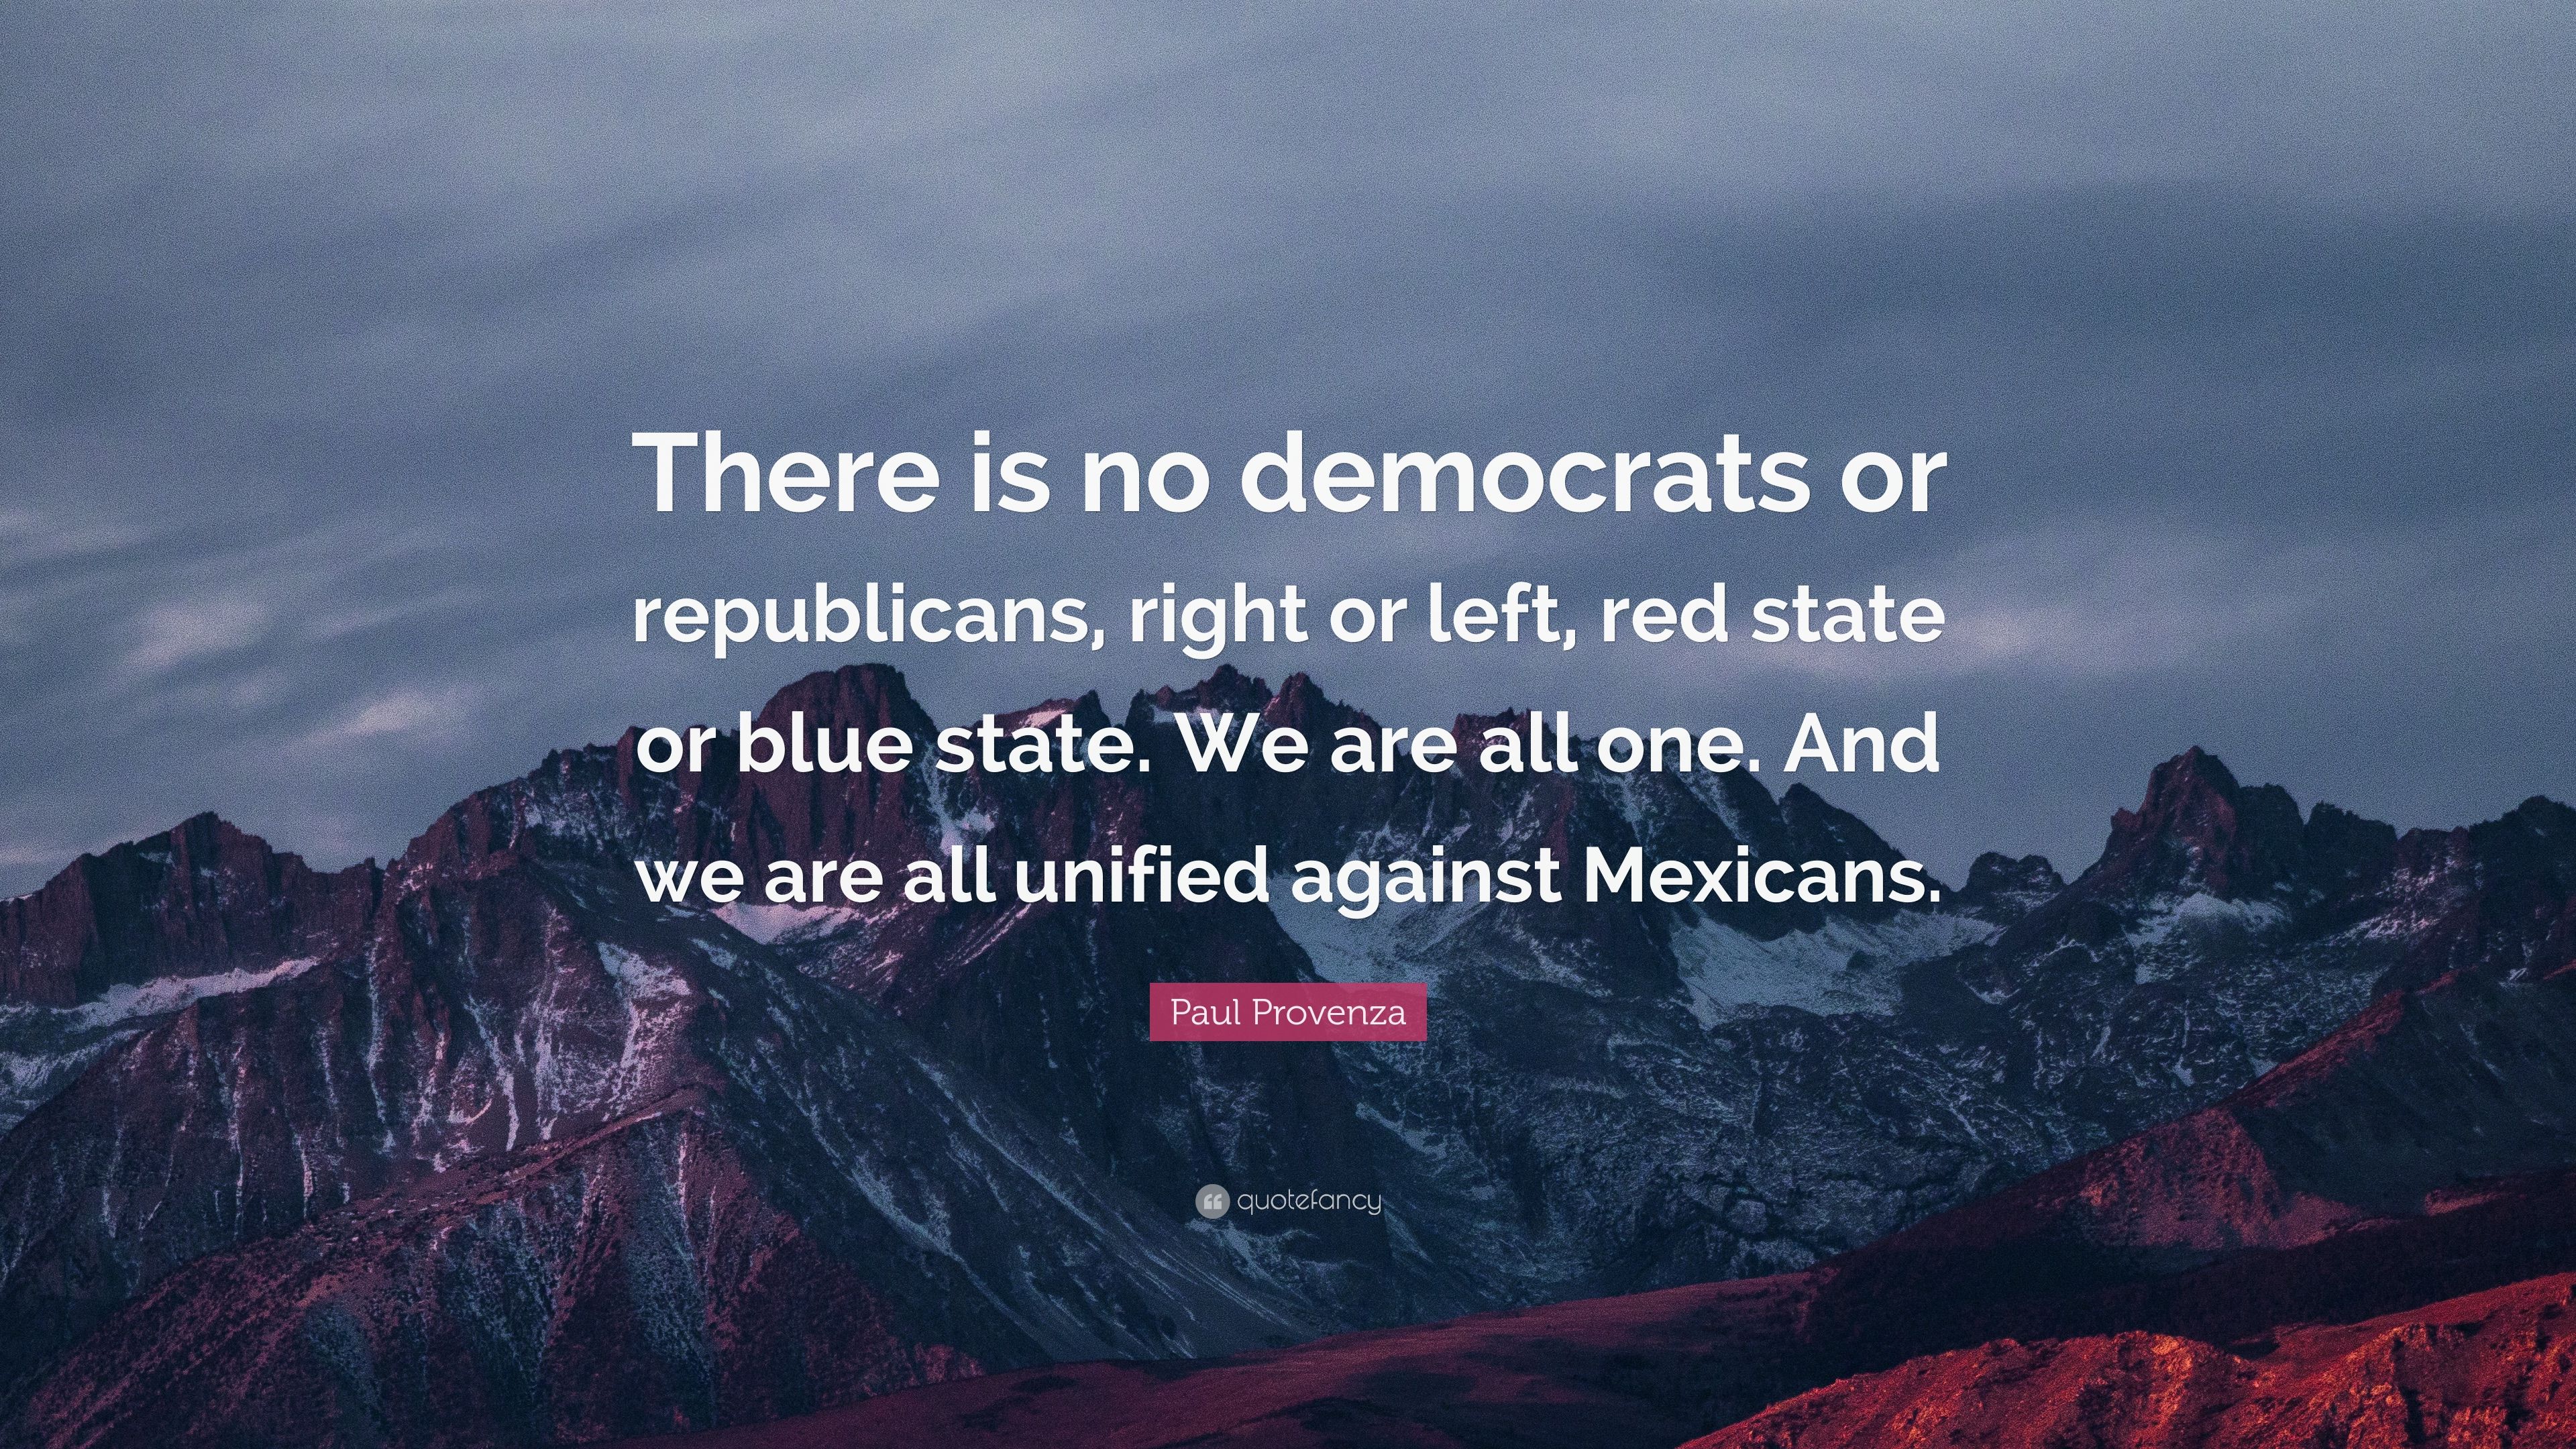 Paul Provenza Quote: “There is no democrats or republicans